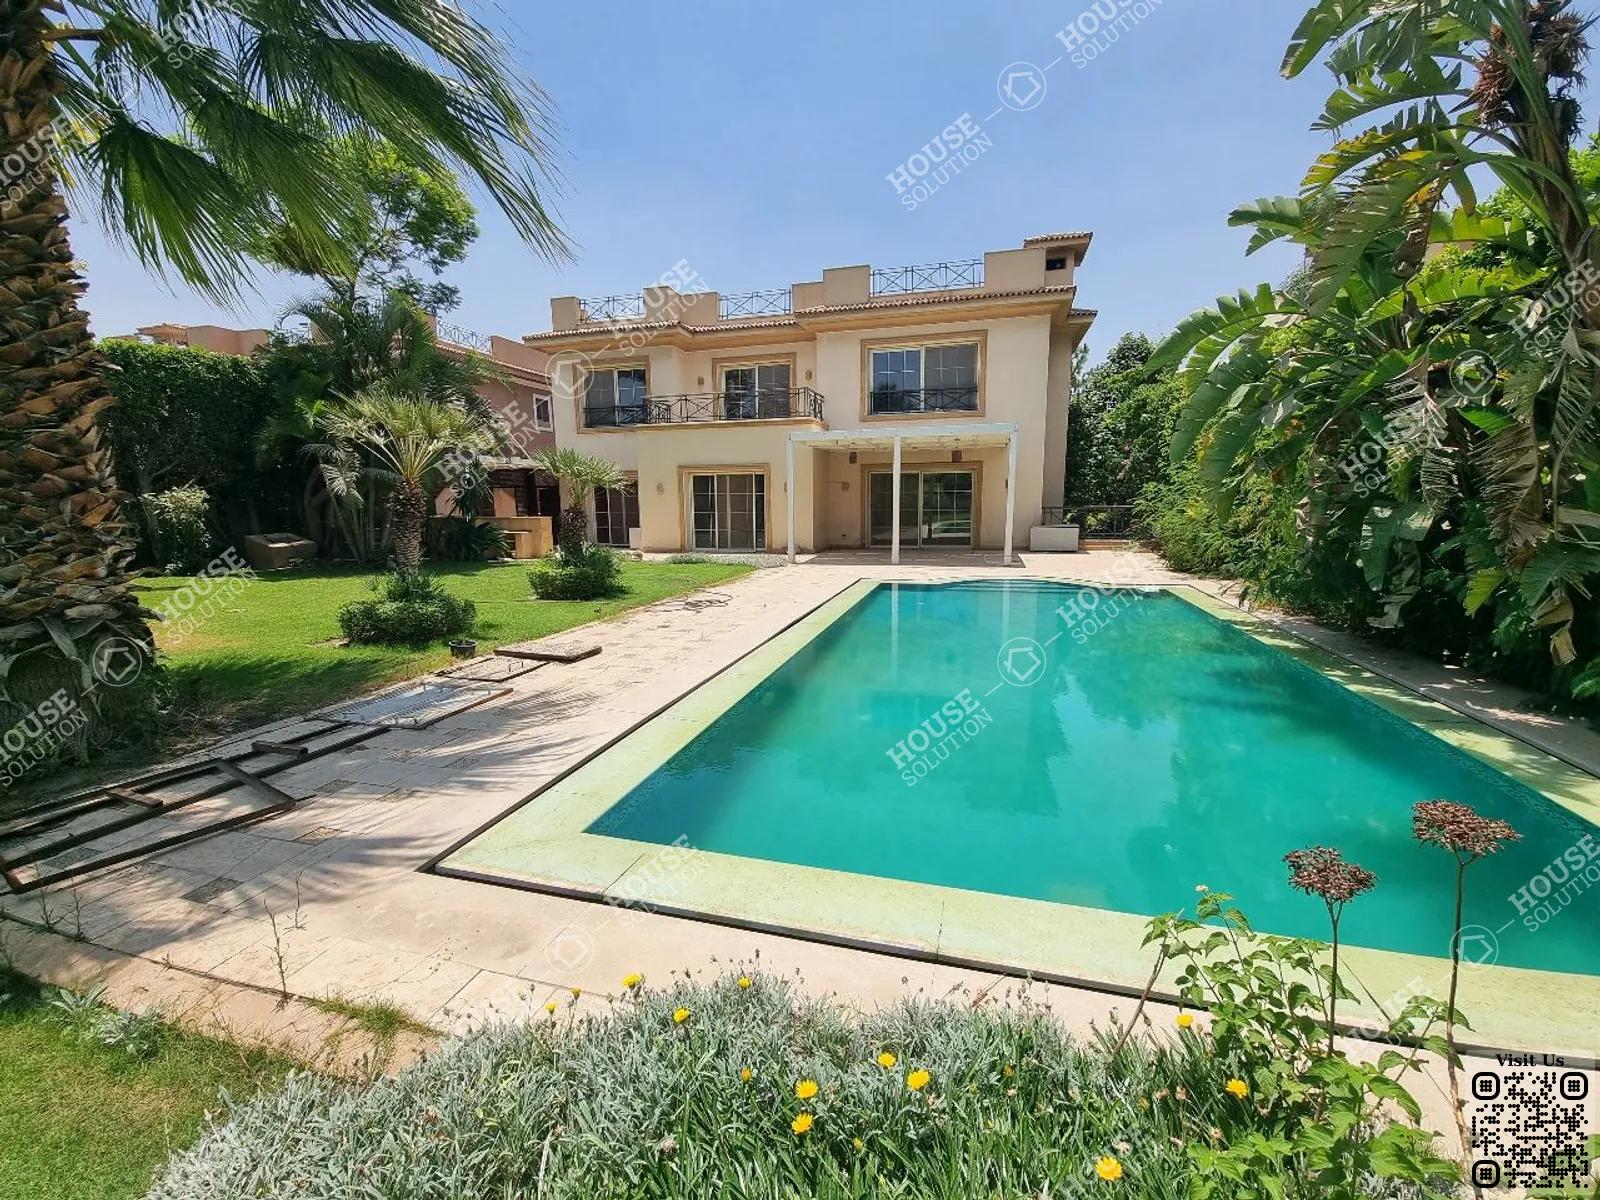 PRIVATE SWIMMING POOL  @ Villas For Rent In Katameya katameya Heights Area: 750 m² consists of 5 Bedrooms 7 Bathrooms Semi furnished 5 stars #5512-0